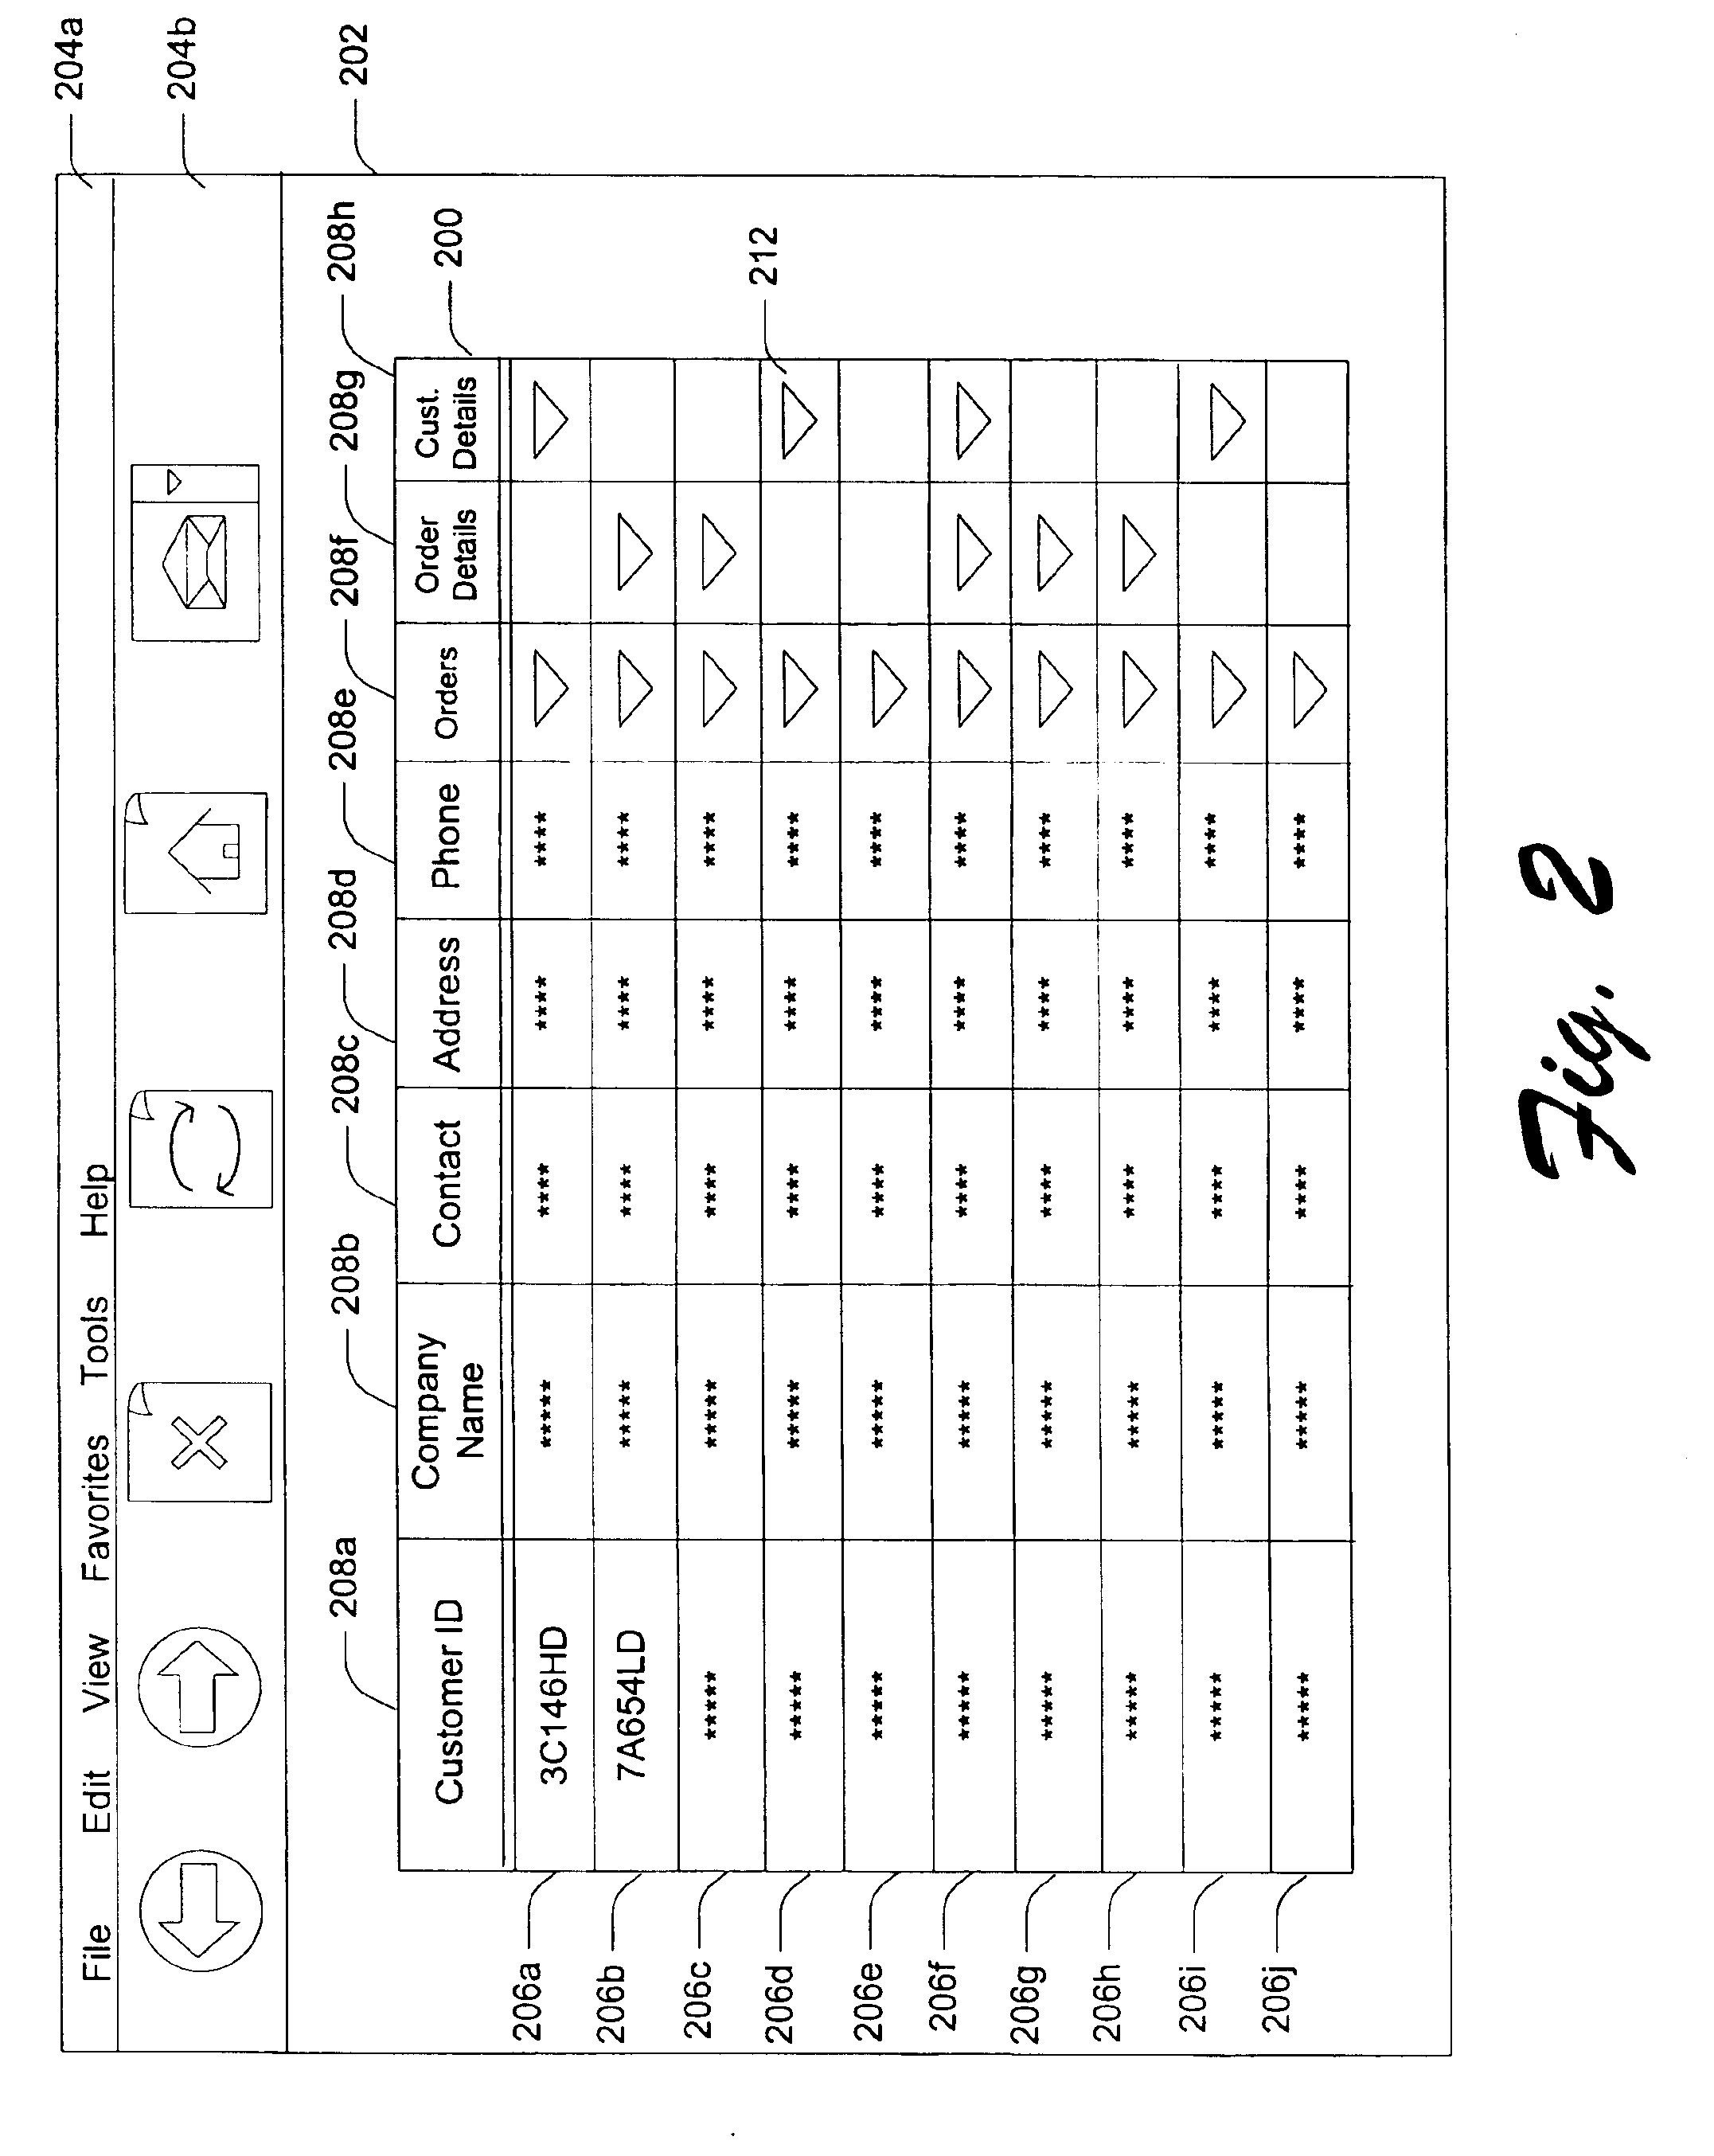 Systems and methods for creating and displaying a user interface for displaying hierarchical data